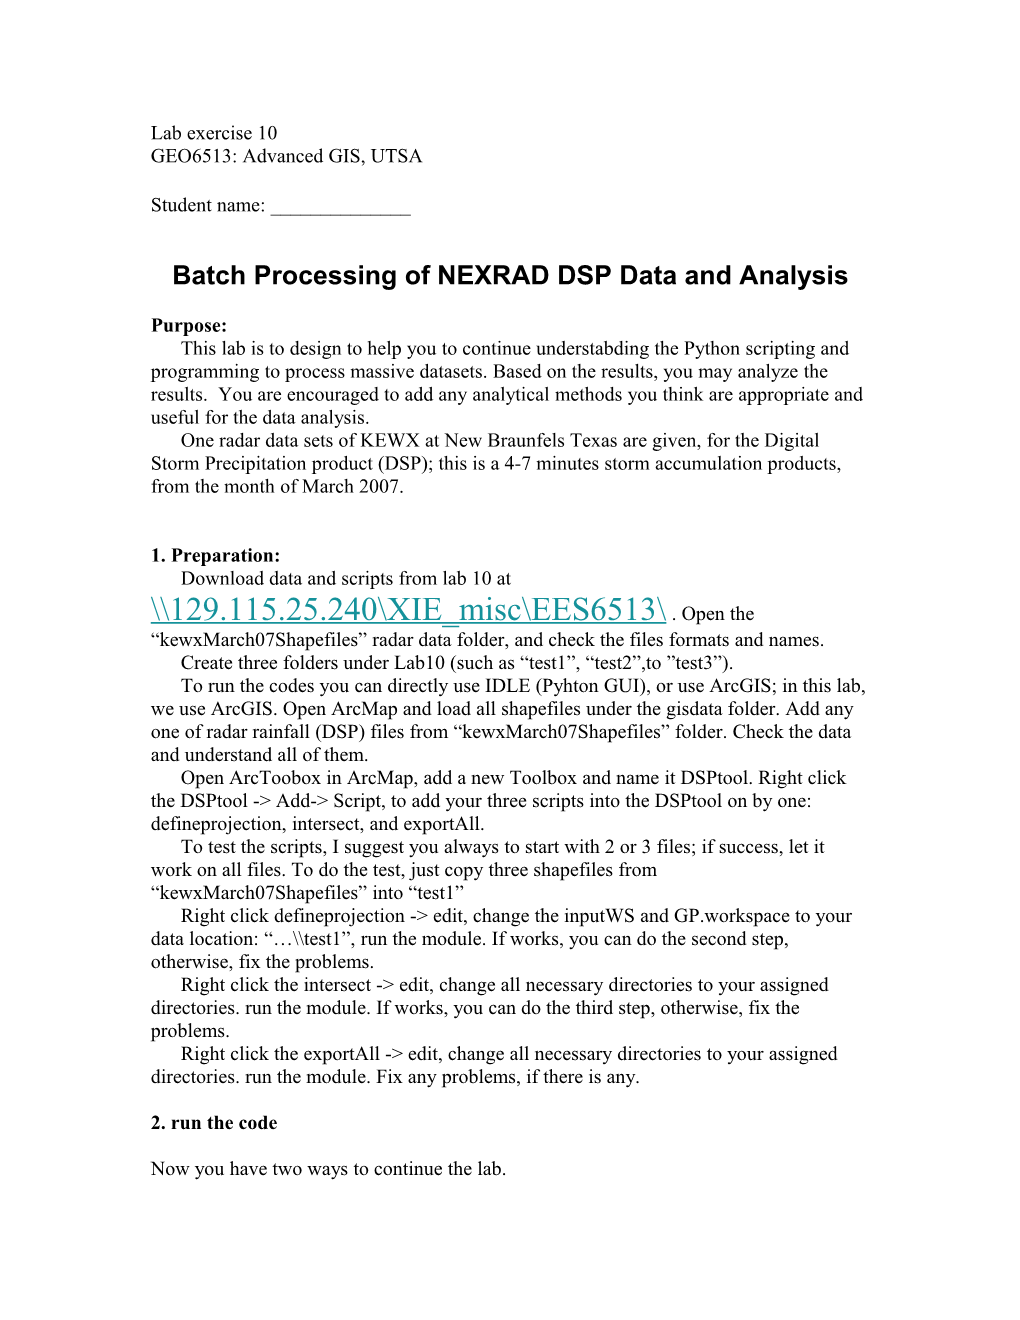 Batch Processing of NEXRAD DSP Data and Analysis